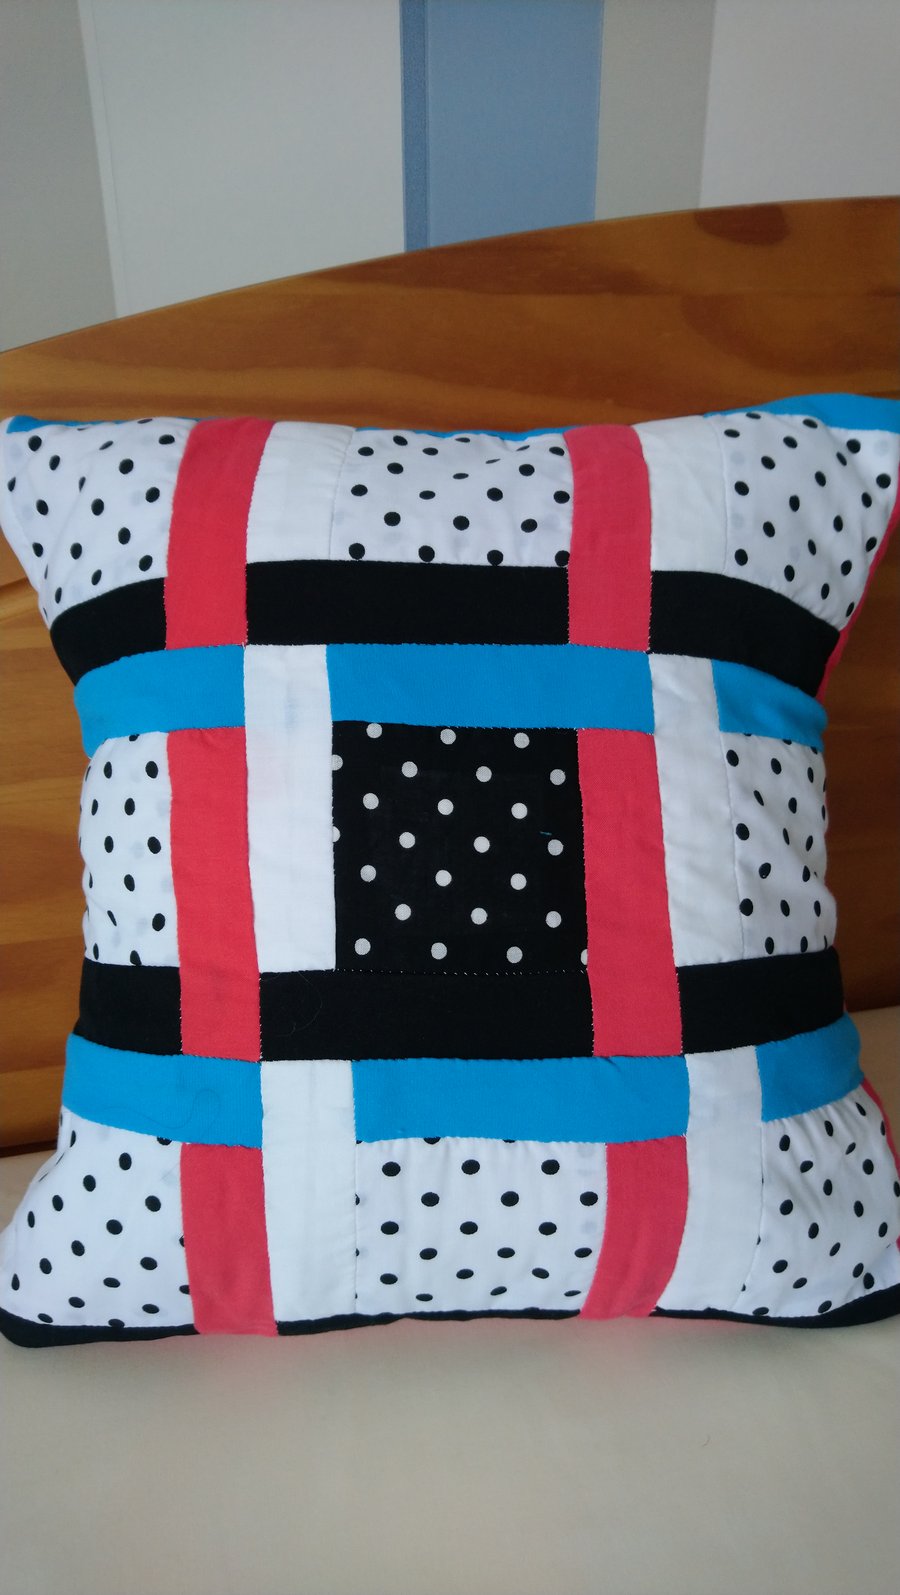 Bright cushion cover, in red, turquoise, black and white. 14x14ins 36x36cm